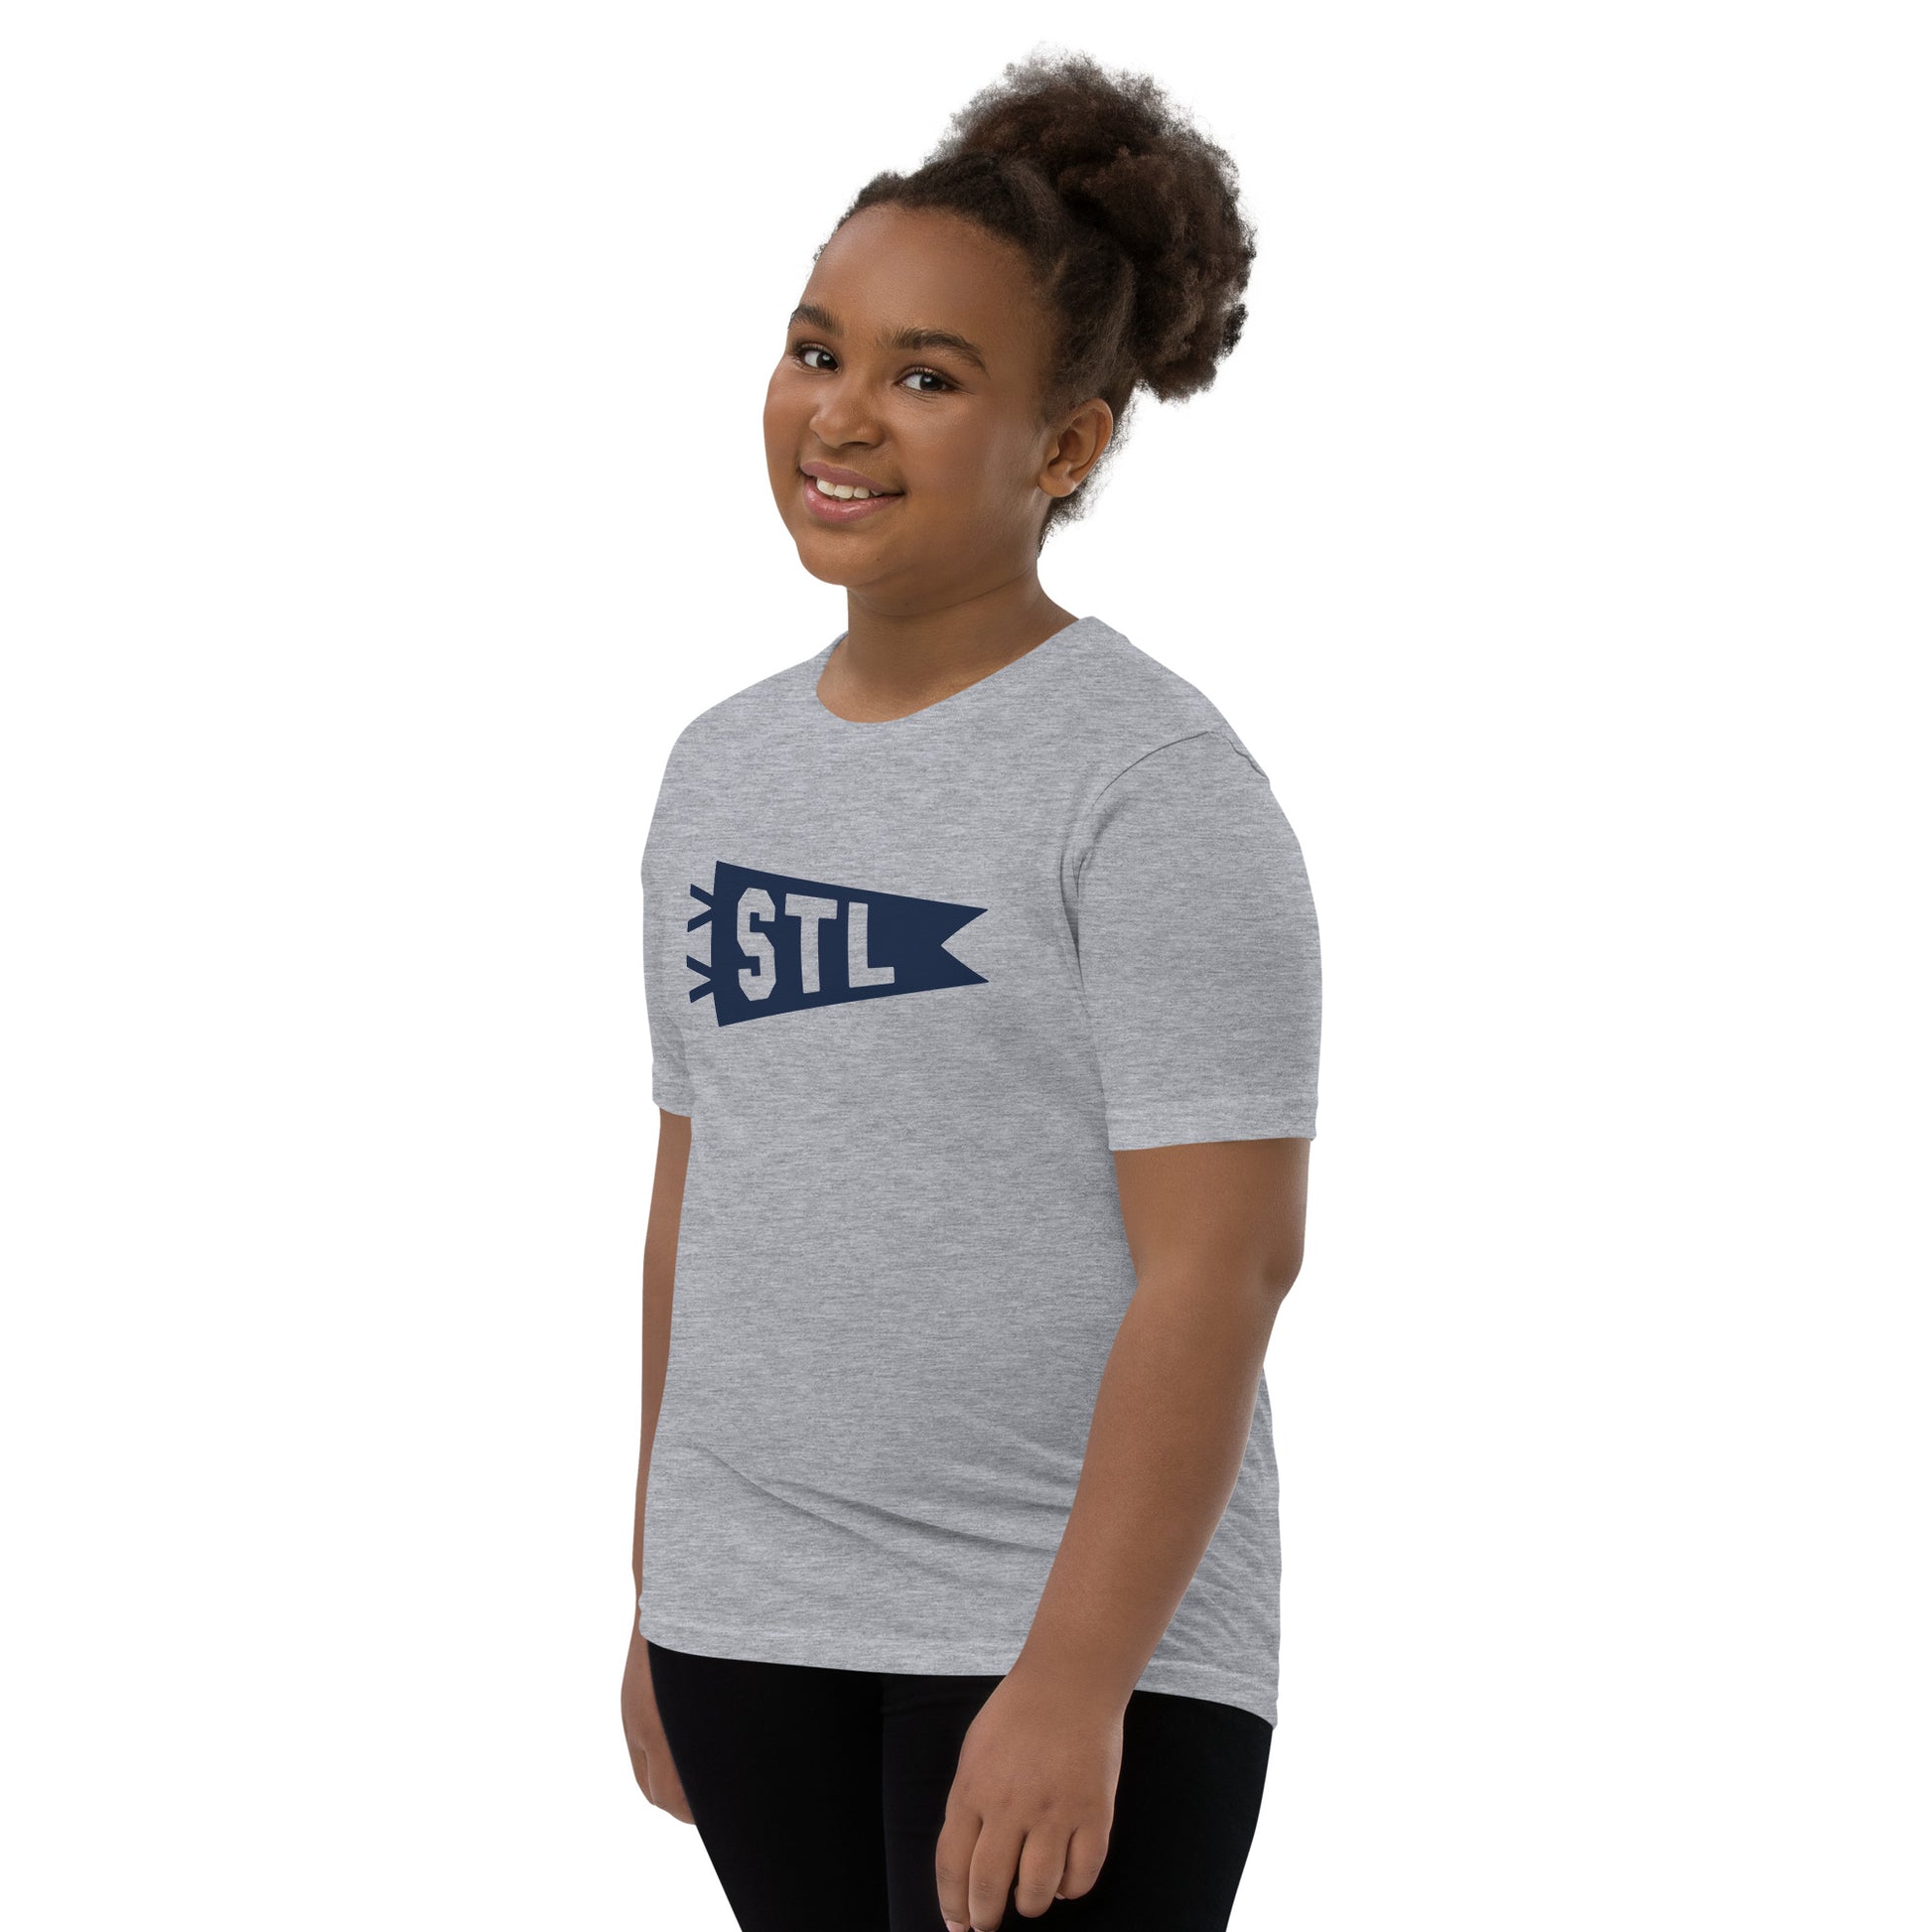 Kid's Airport Code Tee - Navy Blue Graphic • STL St. Louis • YHM Designs - Image 04